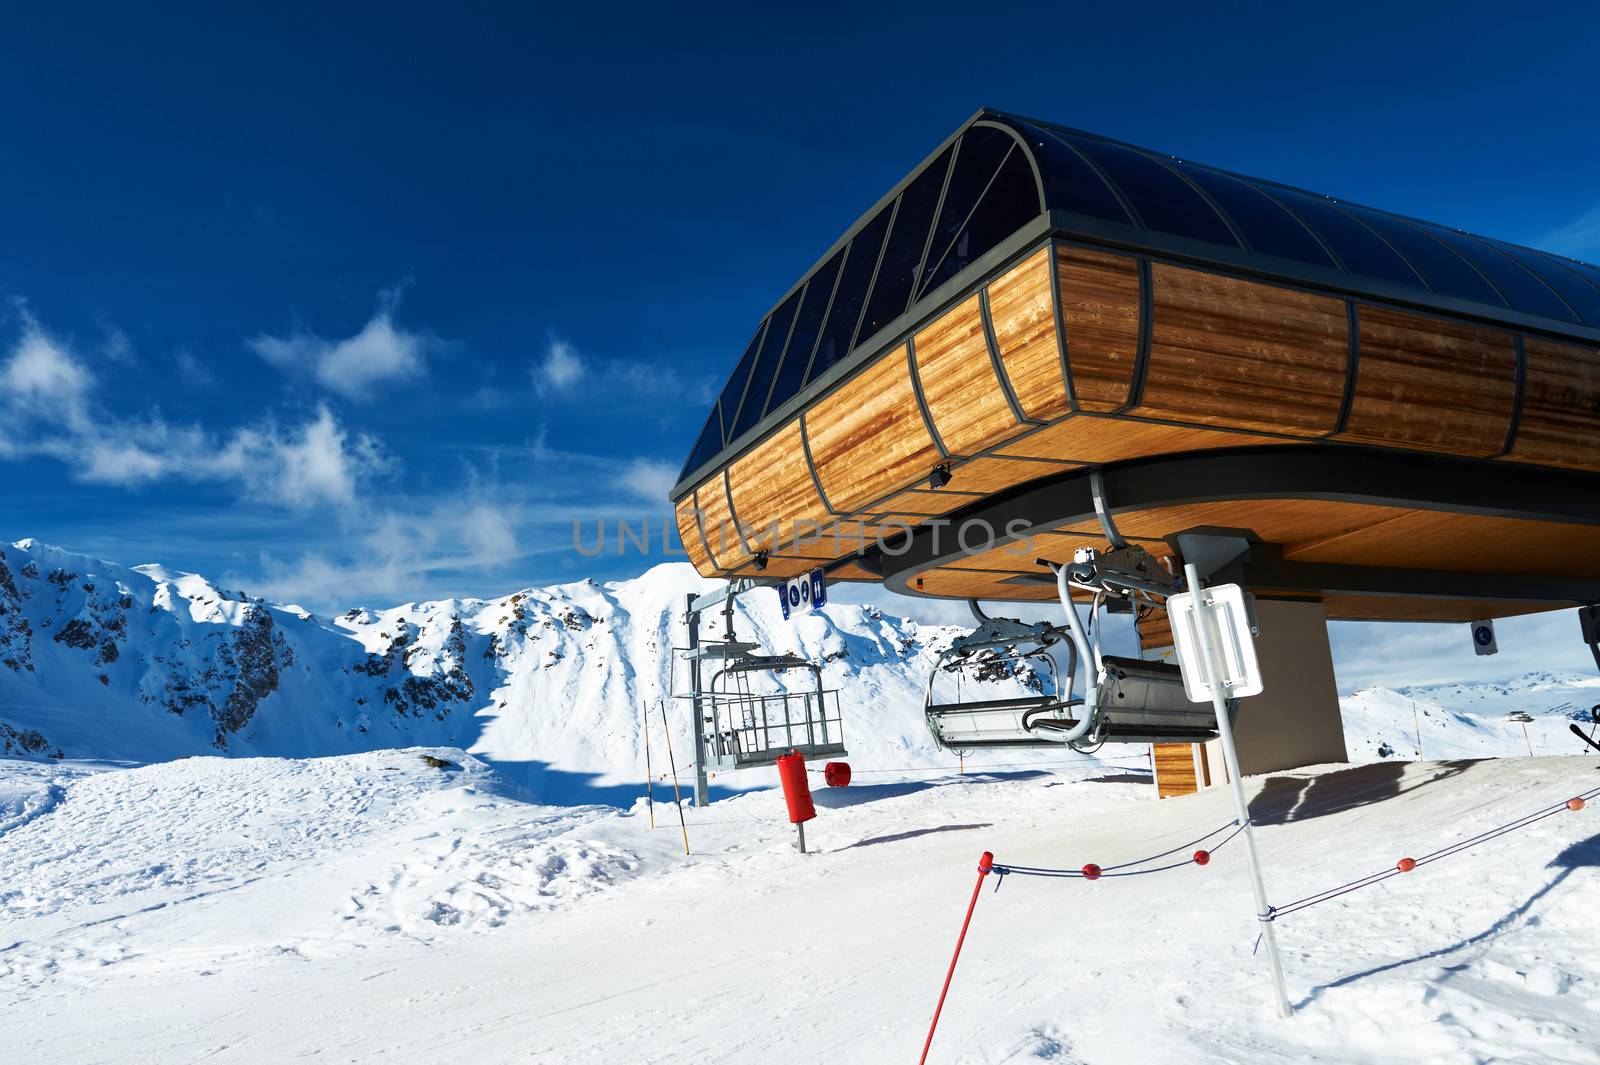 Ski lift station by haveseen